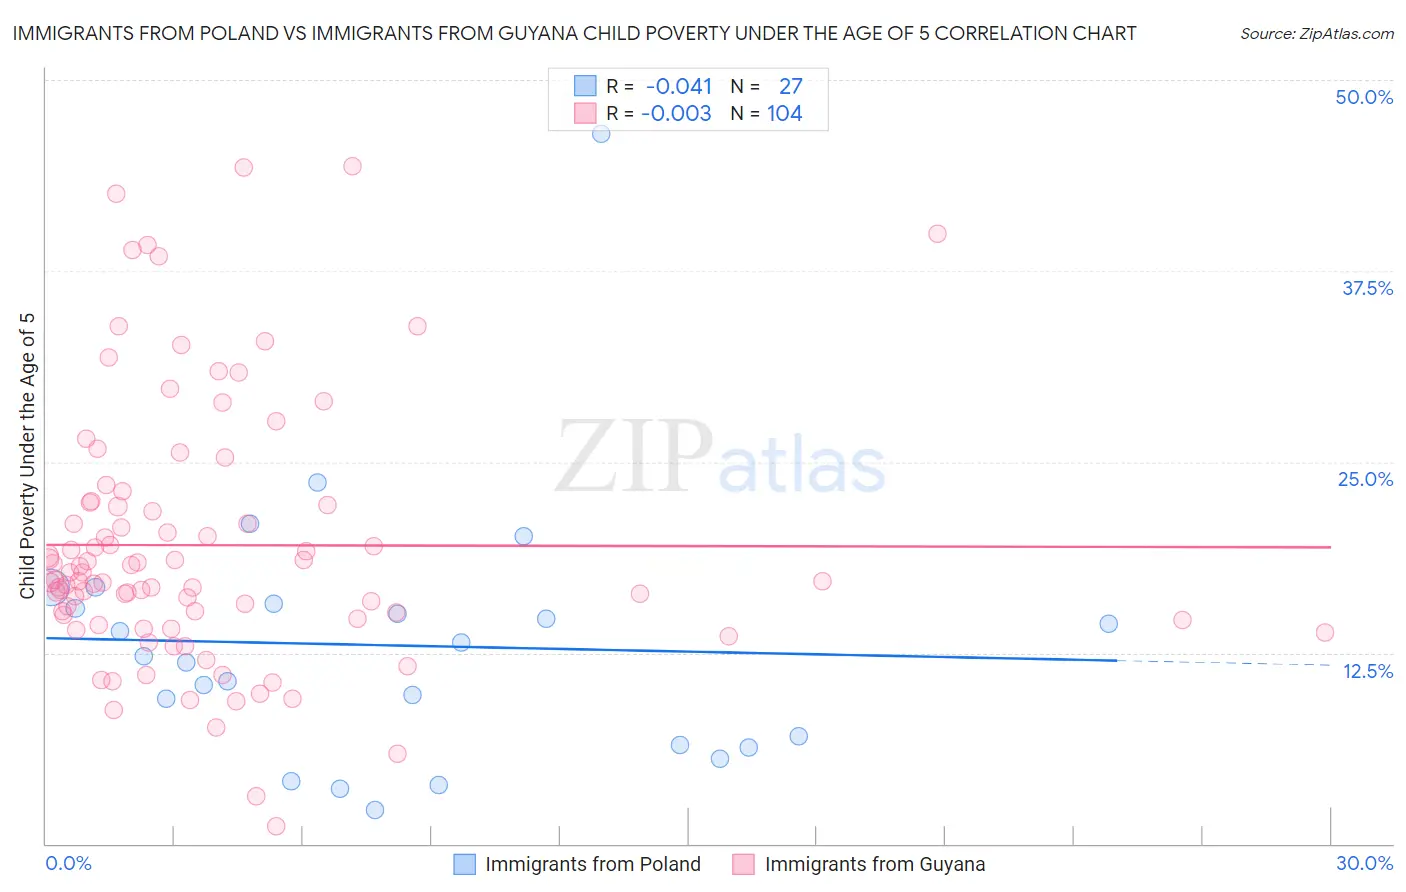 Immigrants from Poland vs Immigrants from Guyana Child Poverty Under the Age of 5